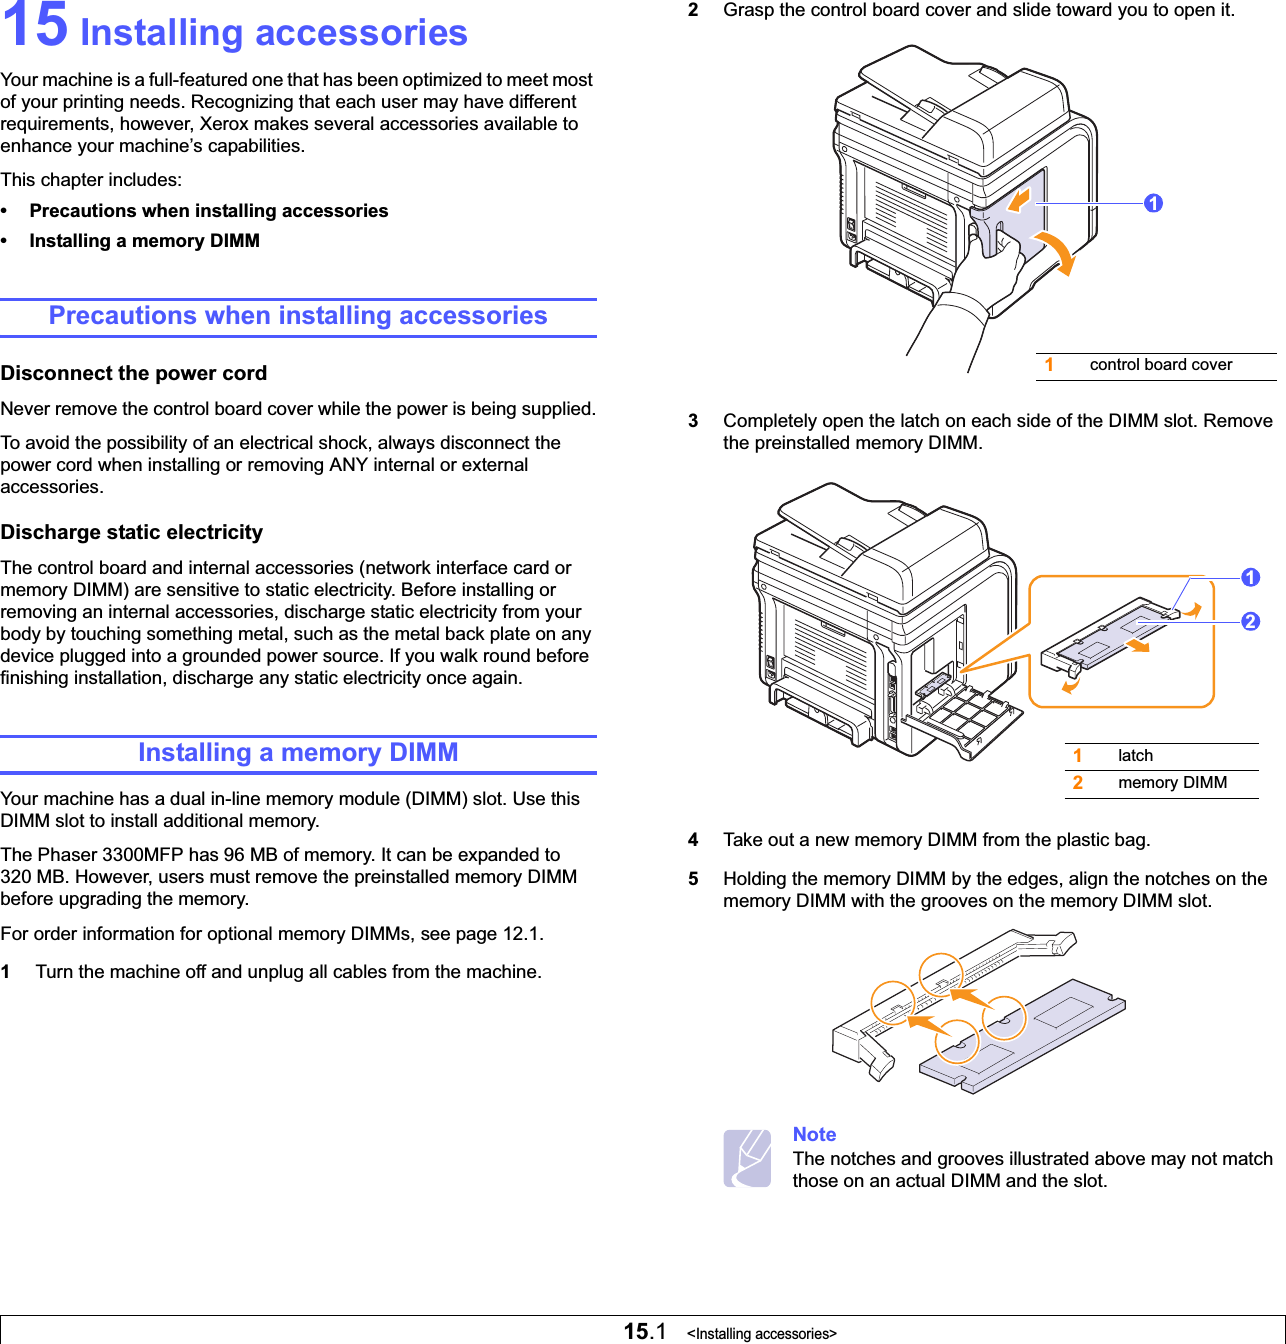 15.1   &lt;Installing accessories&gt;15 Installing accessoriesYour machine is a full-featured one that has been optimized to meet most of your printing needs. Recognizing that each user may have different requirements, however, Xerox makes several accessories available to enhance your machine’s capabilities.This chapter includes:• Precautions when installing accessories• Installing a memory DIMMPrecautions when installing accessoriesDisconnect the power cordNever remove the control board cover while the power is being supplied.To avoid the possibility of an electrical shock, always disconnect the power cord when installing or removing ANY internal or external accessories.Discharge static electricityThe control board and internal accessories (network interface card or memory DIMM) are sensitive to static electricity. Before installing or removing an internal accessories, discharge static electricity from your body by touching something metal, such as the metal back plate on any device plugged into a grounded power source. If you walk round before finishing installation, discharge any static electricity once again.Installing a memory DIMMYour machine has a dual in-line memory module (DIMM) slot. Use this DIMM slot to install additional memory.The Phaser 3300MFP has 96 MB of memory. It can be expanded to 320 MB. However, users must remove the preinstalled memory DIMM before upgrading the memory. For order information for optional memory DIMMs, see page 12.1.1Turn the machine off and unplug all cables from the machine.2Grasp the control board cover and slide toward you to open it.3Completely open the latch on each side of the DIMM slot. Remove the preinstalled memory DIMM.4Take out a new memory DIMM from the plastic bag.5Holding the memory DIMM by the edges, align the notches on the memory DIMM with the grooves on the memory DIMM slot.NoteThe notches and grooves illustrated above may not match those on an actual DIMM and the slot.1control board cover11latch2memory DIMM12